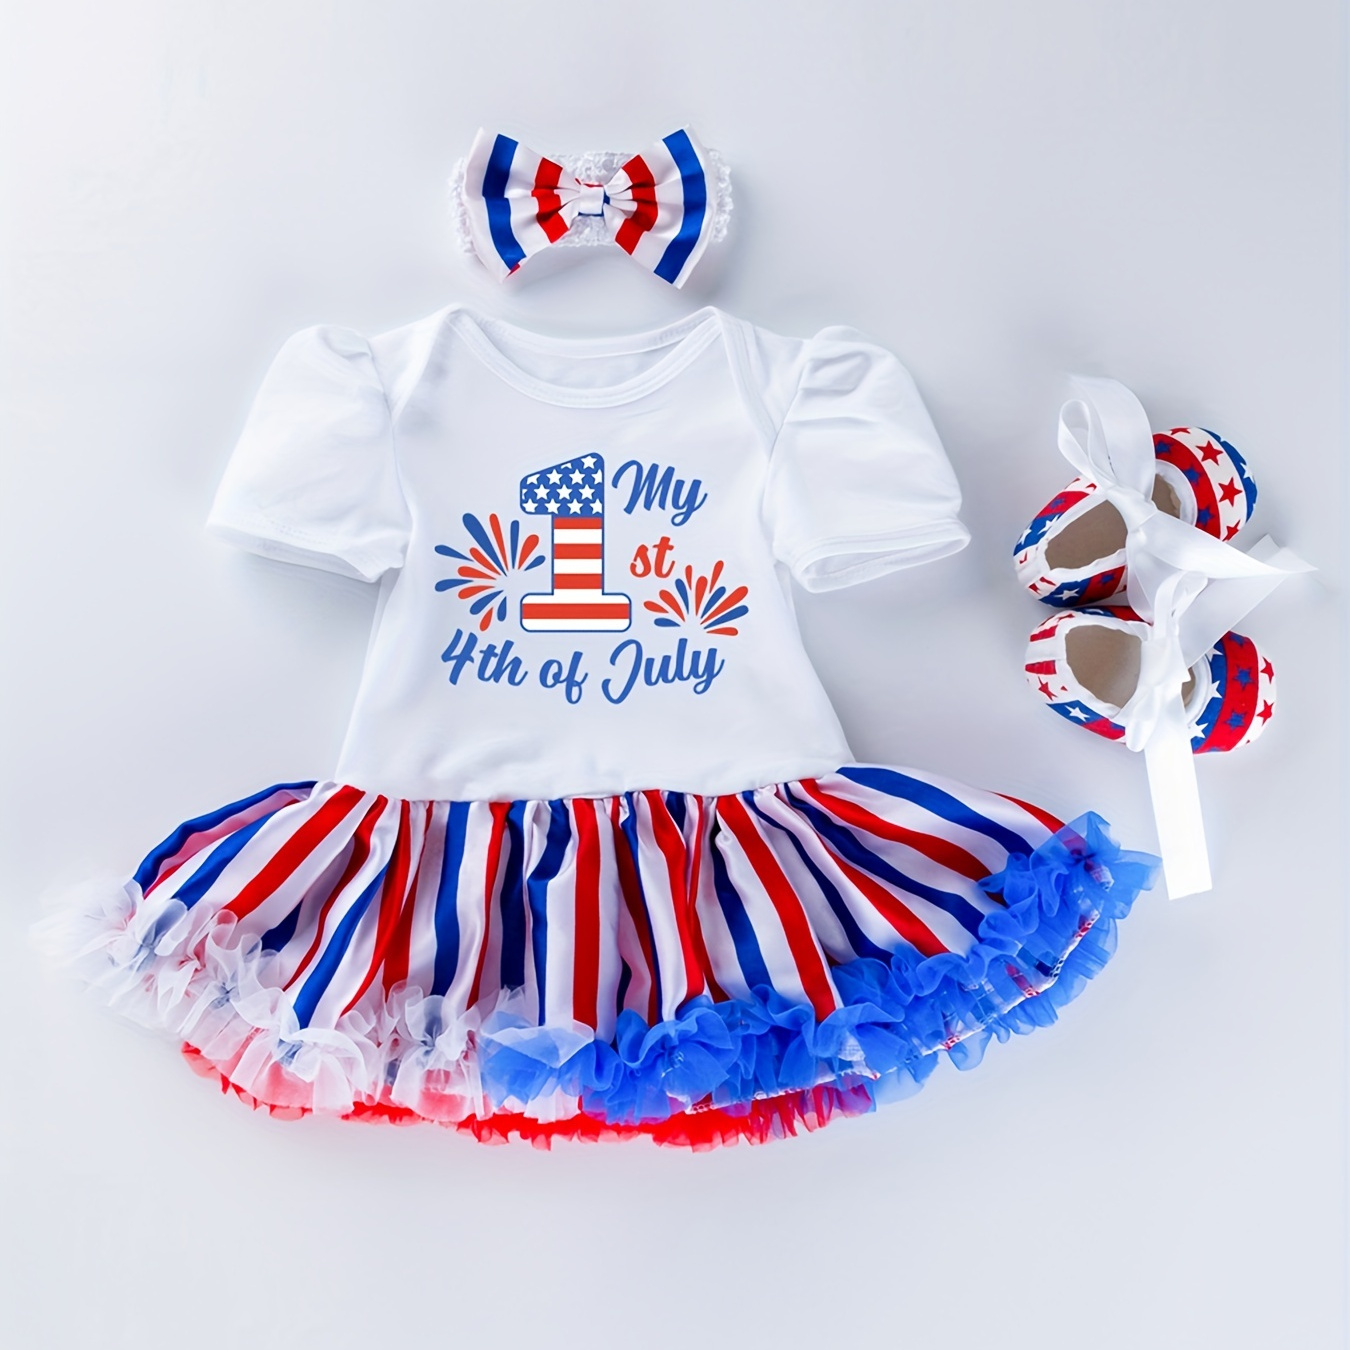 

Baby Girls Cute "my 1st 4th Of July" Short Sleeve Mesh Onesie Dress & Headband & Shoes Set Clothes For Independence Day